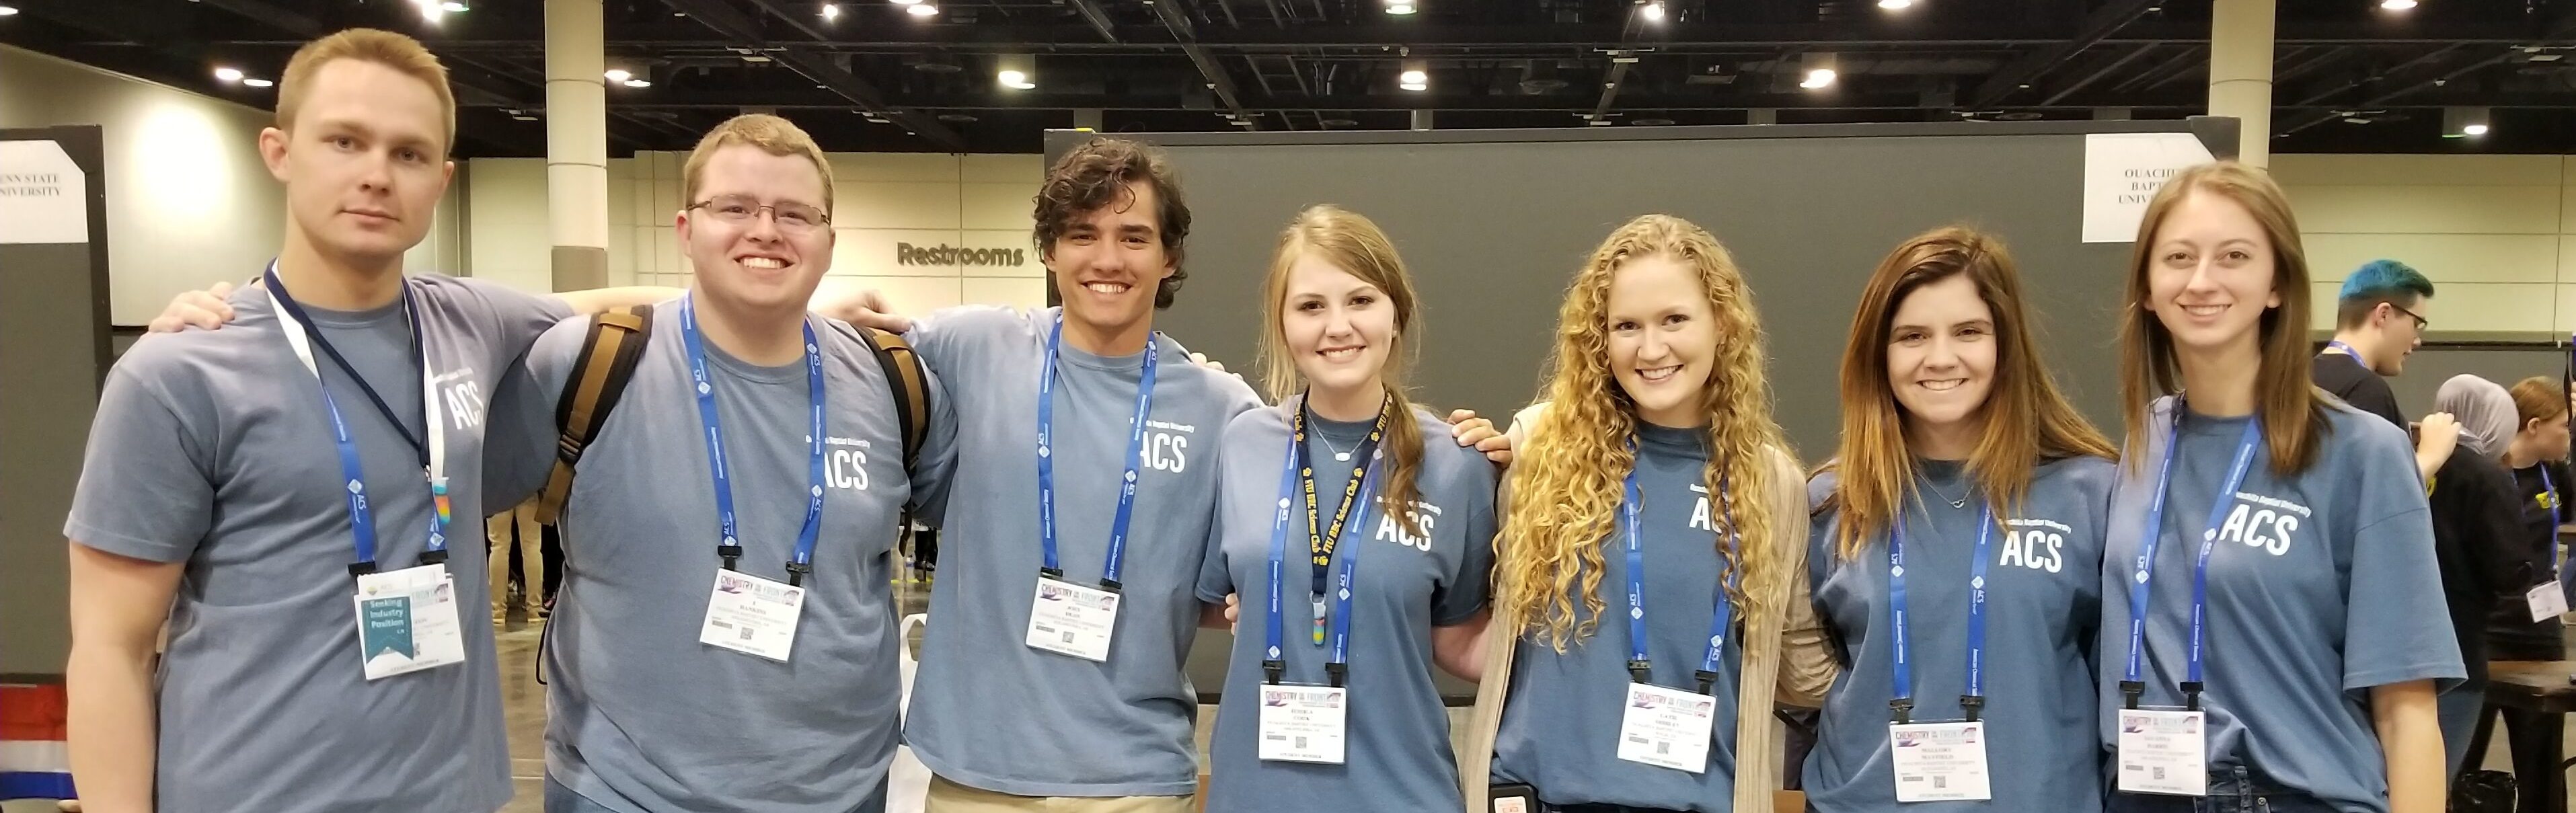 Seven Ouachita students presented research and participated in a demo-exchange at the American Chemical Society national Meeting and Exposition this spring, including (from left): Alex Podguzov, Travis Hankins, Joey Dean, Jessica Snelgrove, Catie Shirley, Mallory Mayfield and Savanna Harris. Photo by Sharon Hamilton.